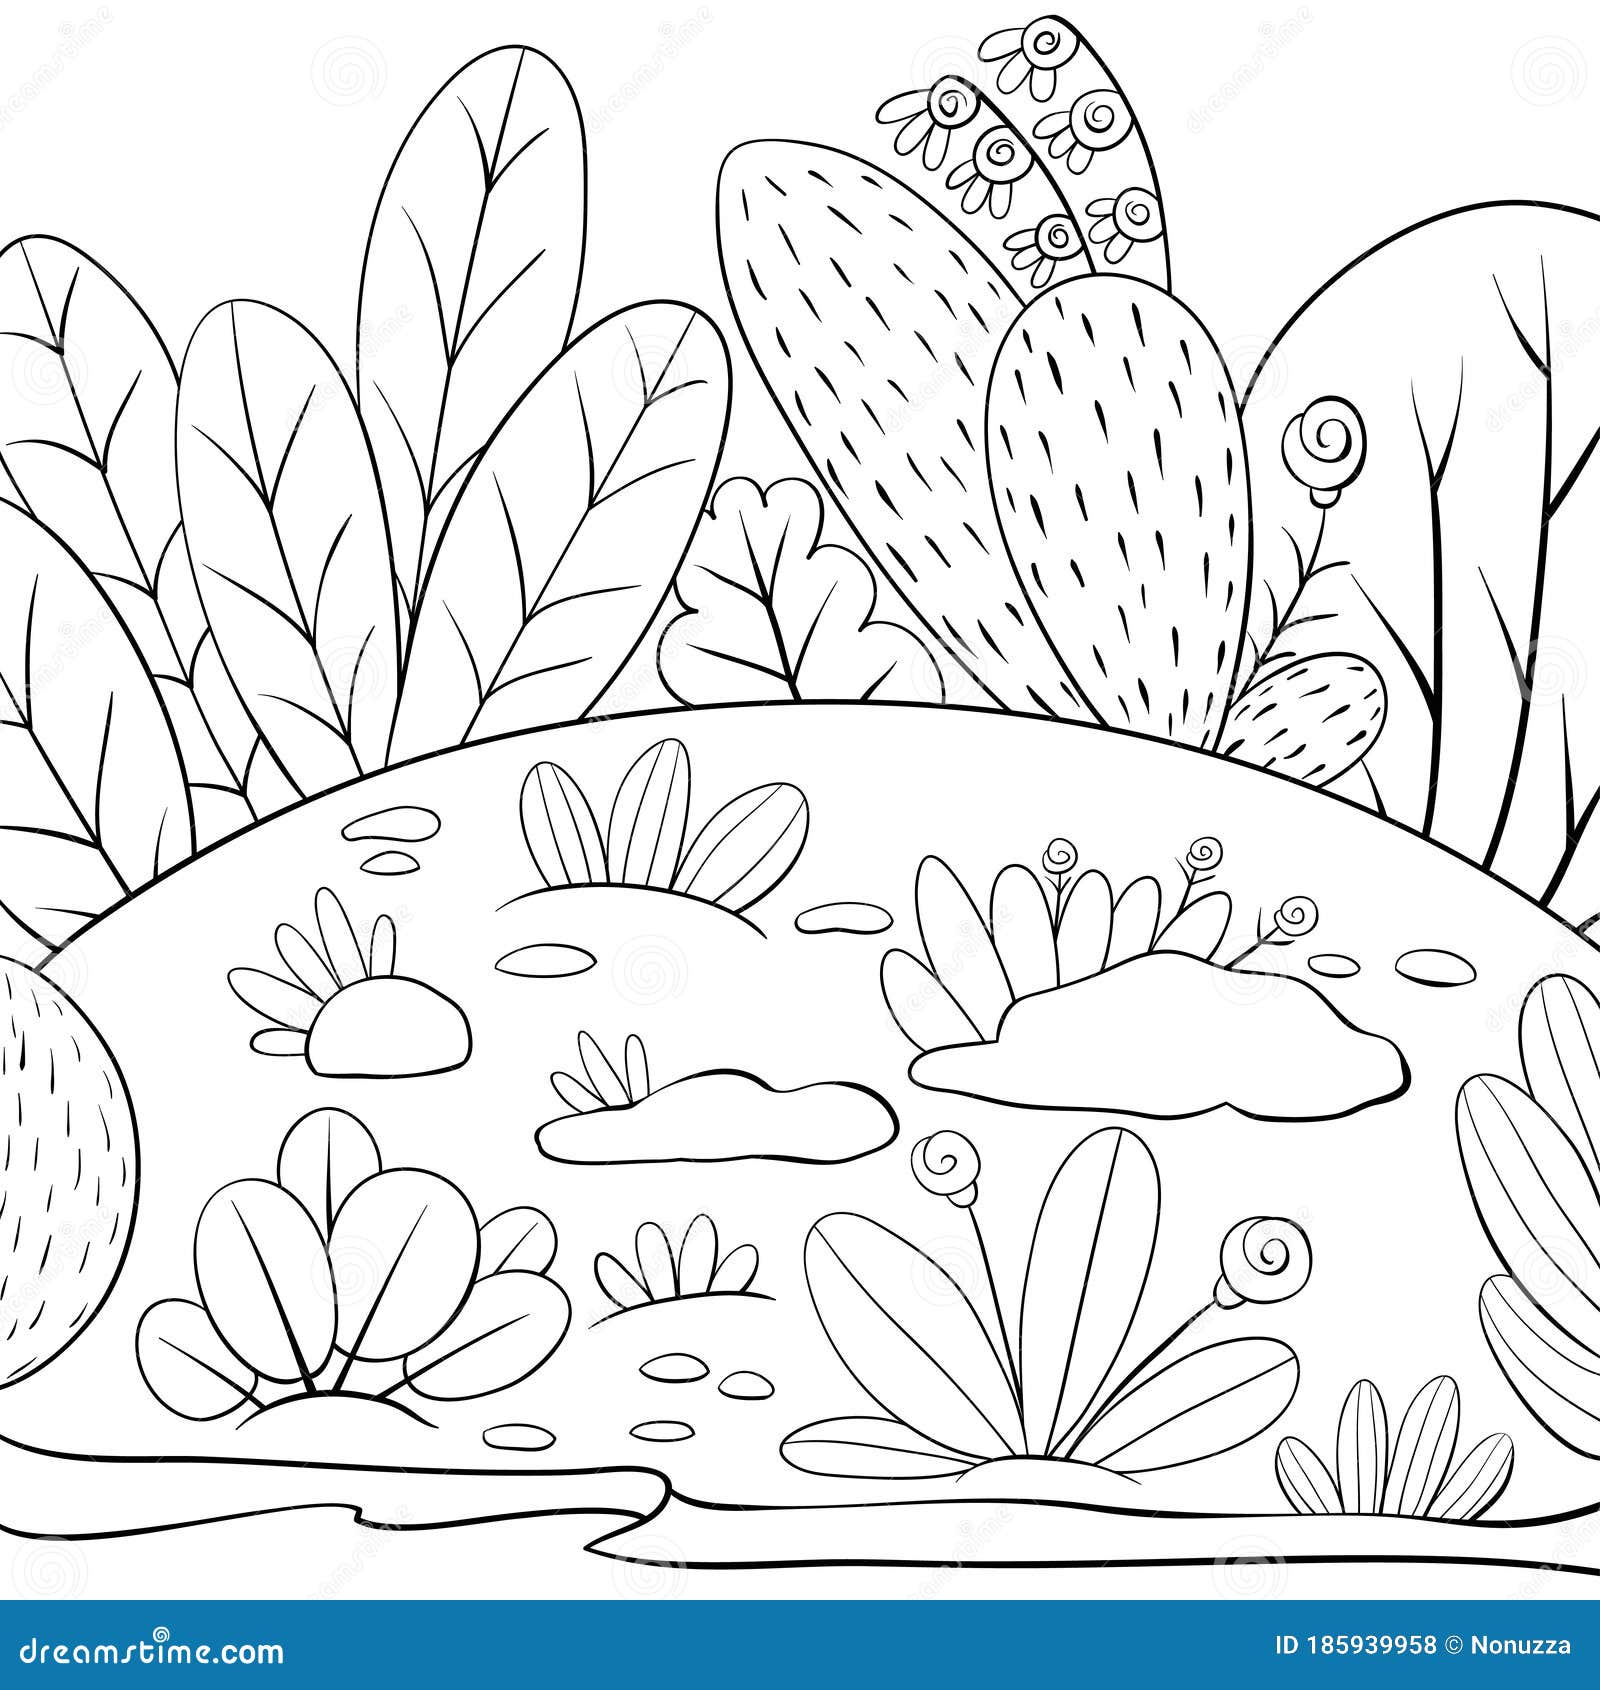 A coloring bookpage for adults and children a nature landscape image for relaxingline art style illustration for print stock vector